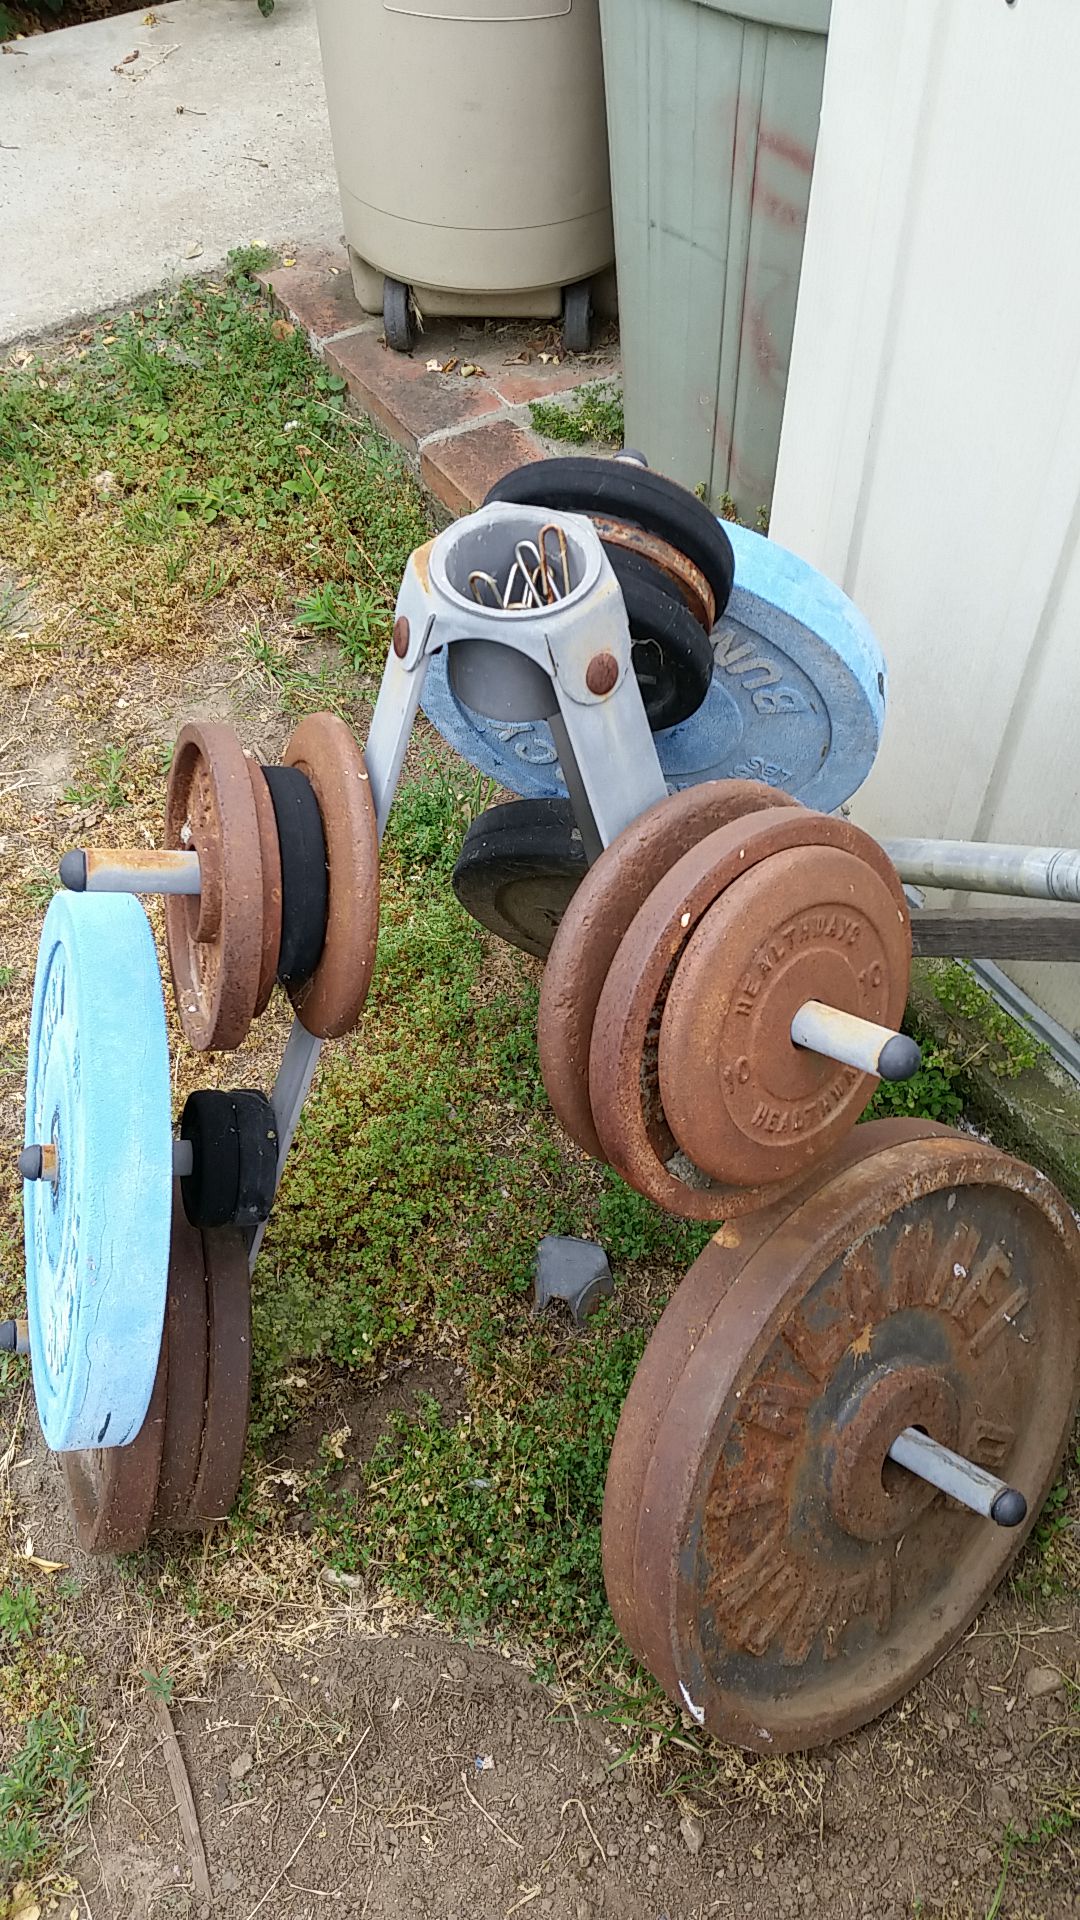 150# +, weights, 1-6'foot bench bar, 2- curling bars, with accessories La Puente area